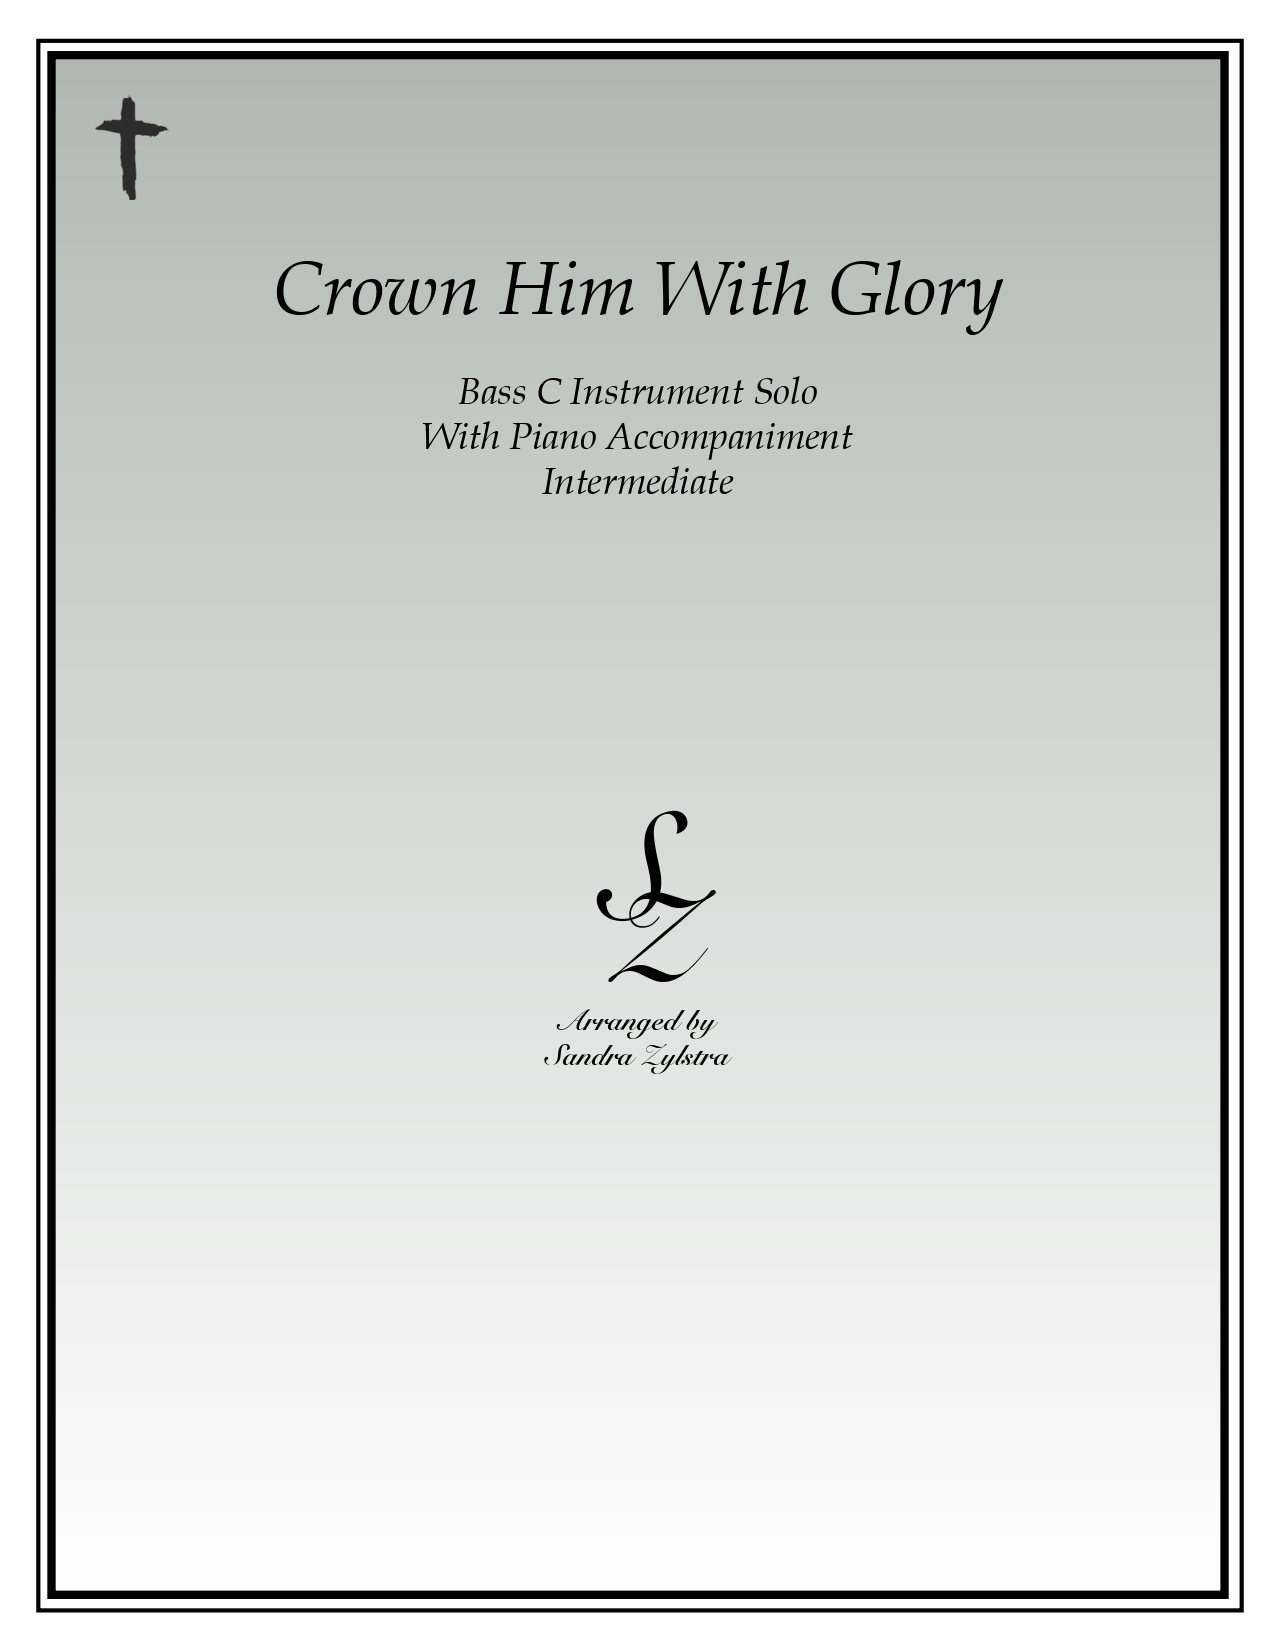 Crown Him With Glory bass C instrument solo part cover page 00011